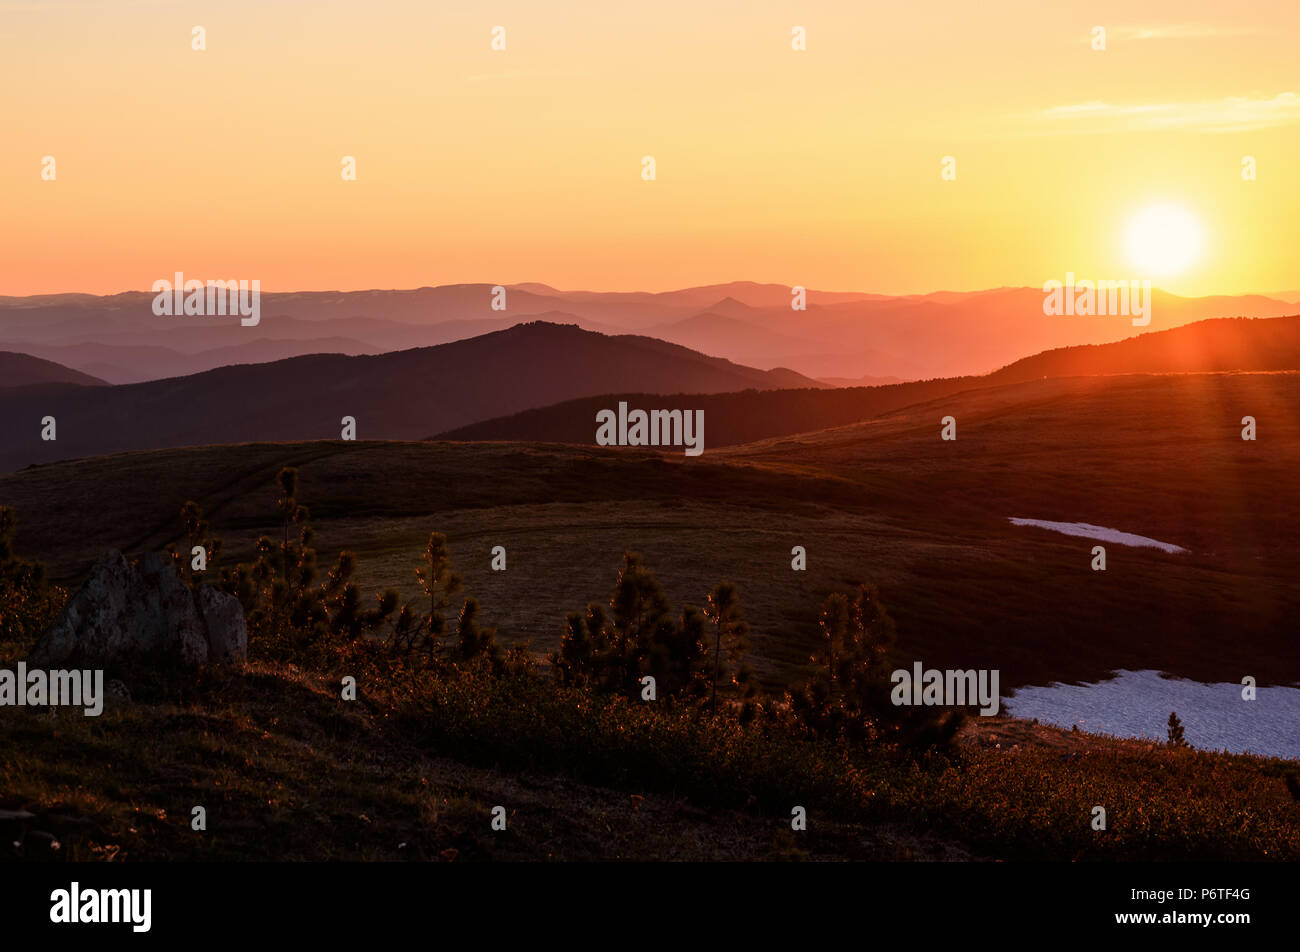 Beautiful sunset with rays over the contours of mountains with stones, small cedars and snow in the foreground Stock Photo